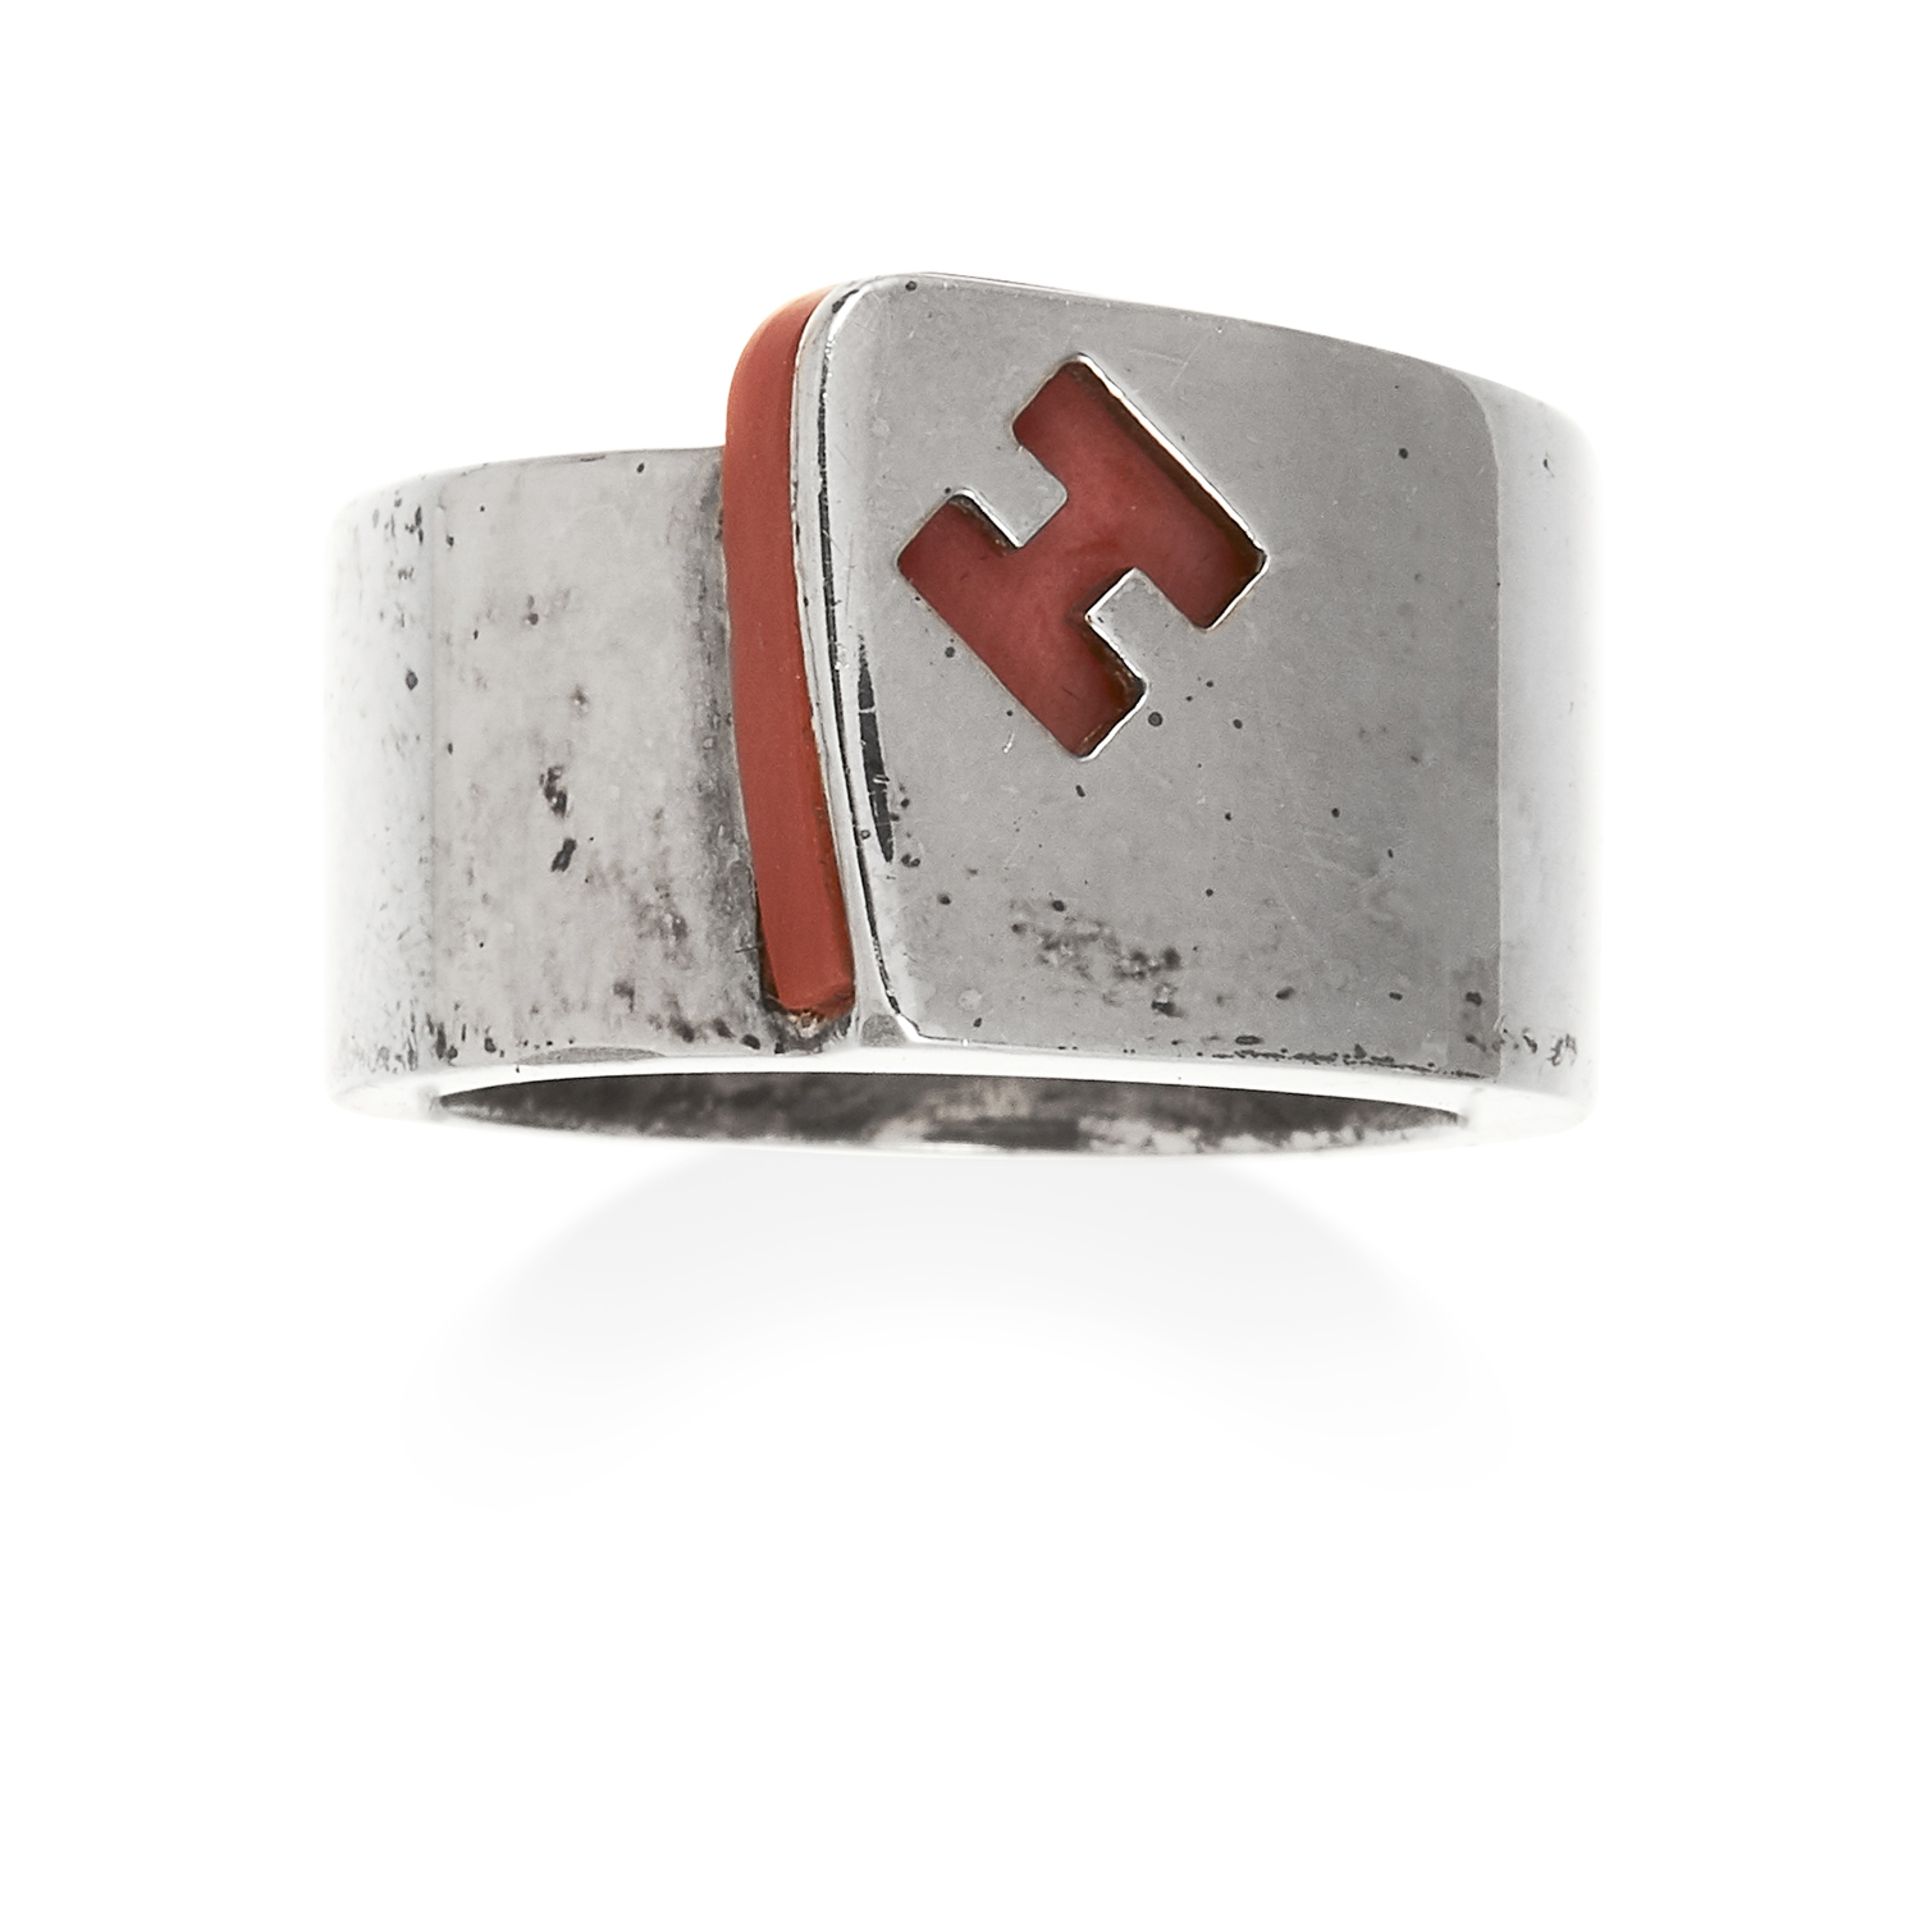 A CORAL 'CANDY' RING, HERMES in sterling silver, the coral plate is overlapped by 'H' imprint,